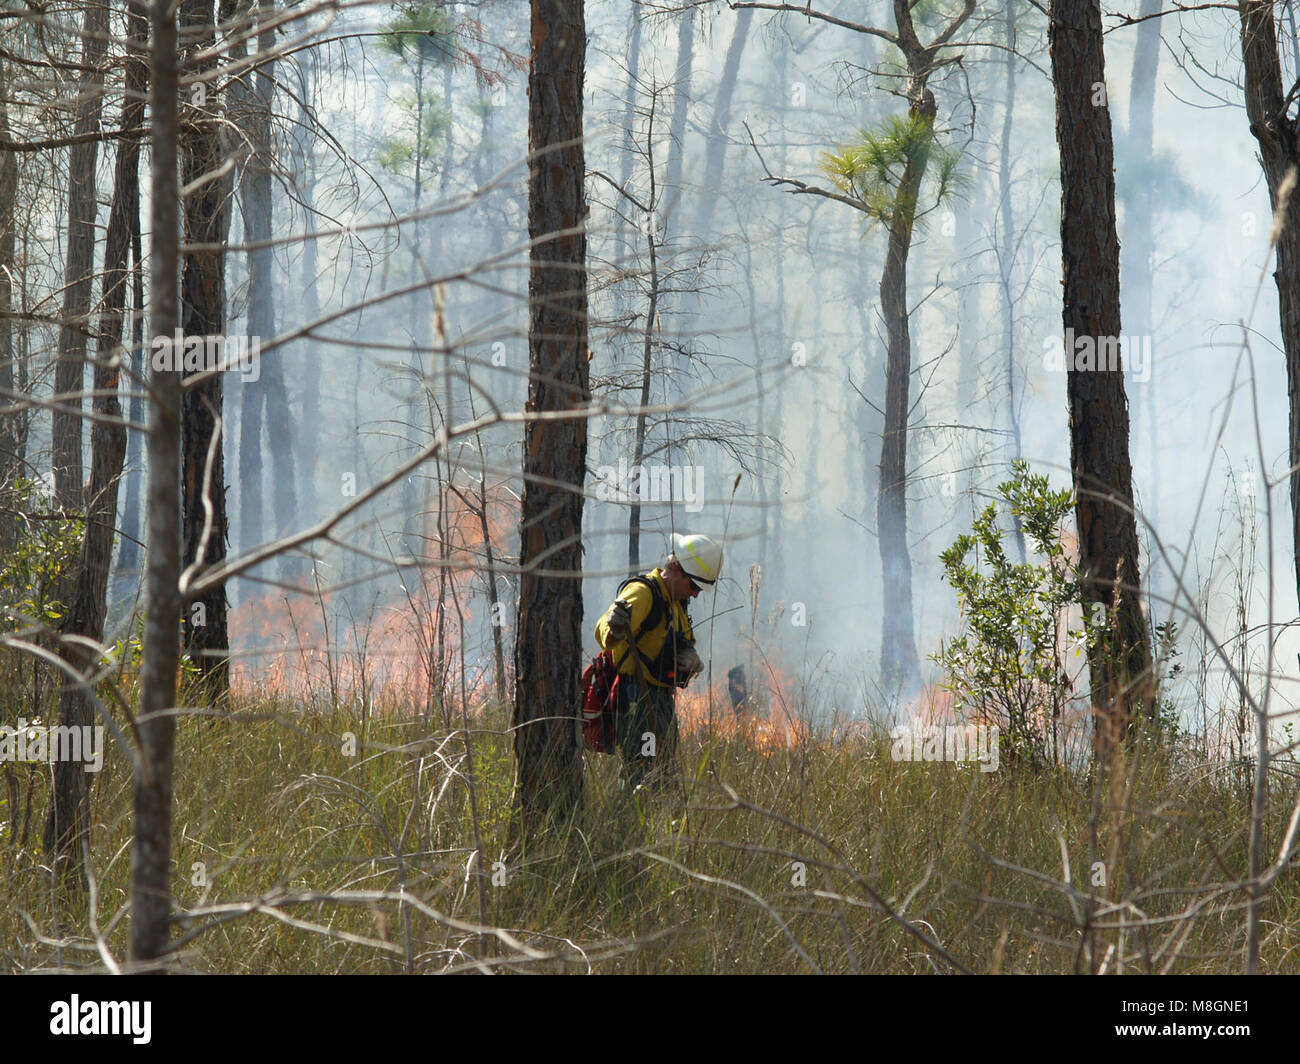 BICY pr image b cr Gustave Pellerin   .Each year the Prescribed Fire Division of Big Cypress National Preserve attempts to burn more that 50,000 acres in a safe and managed way. Stock Photo